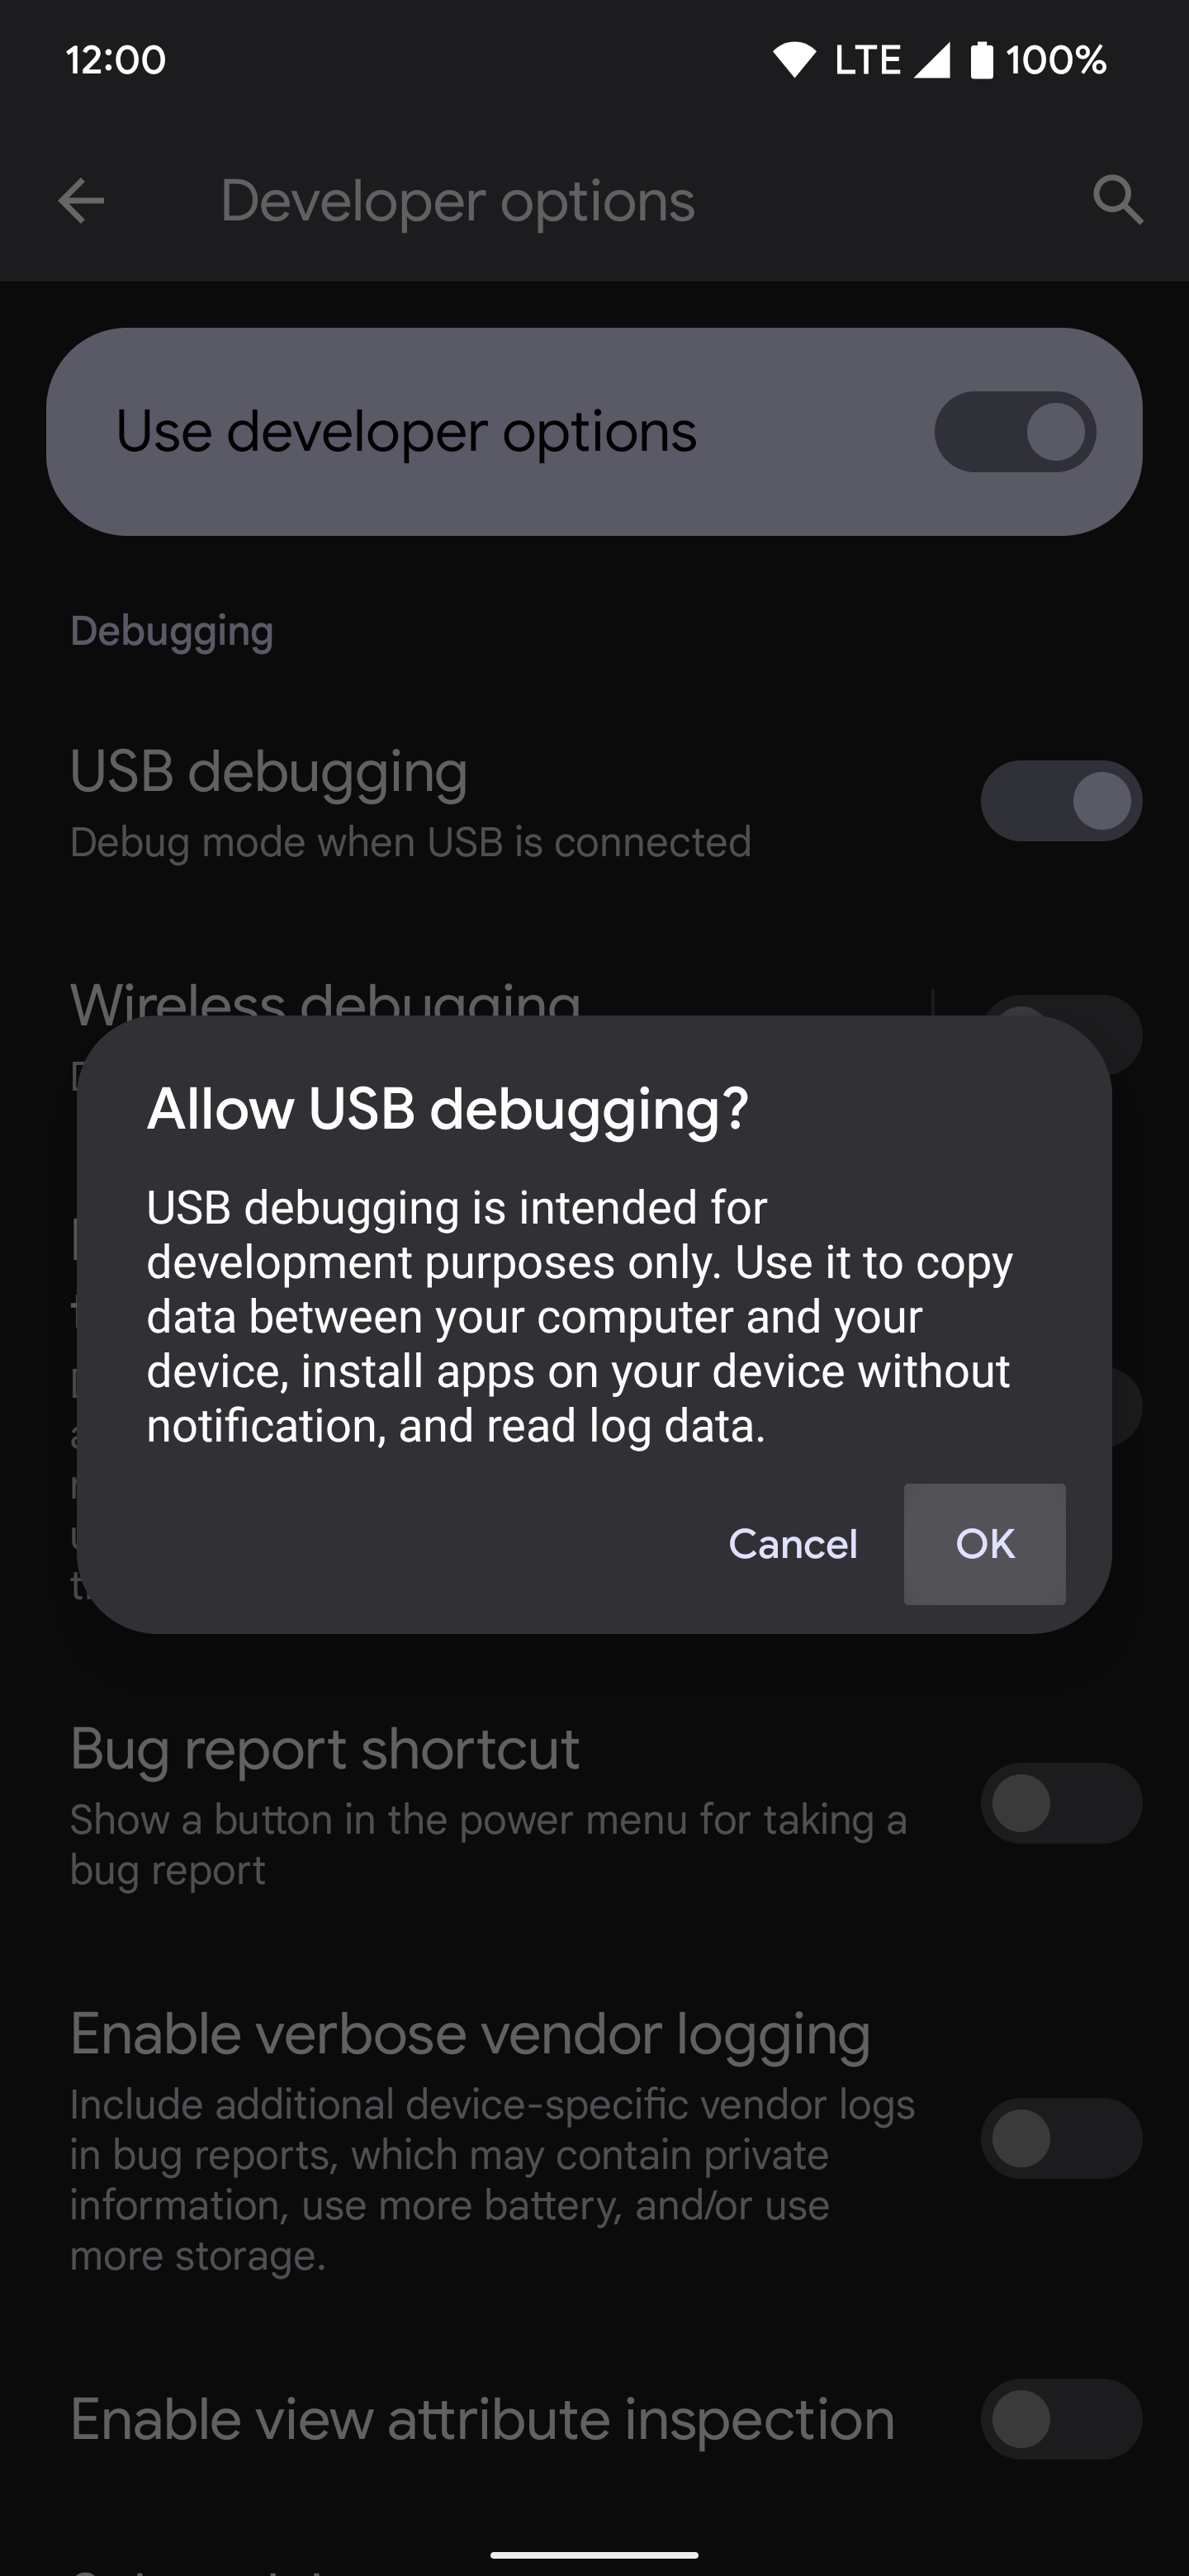 Pressing the OK button to enable the wired USB debugging option.